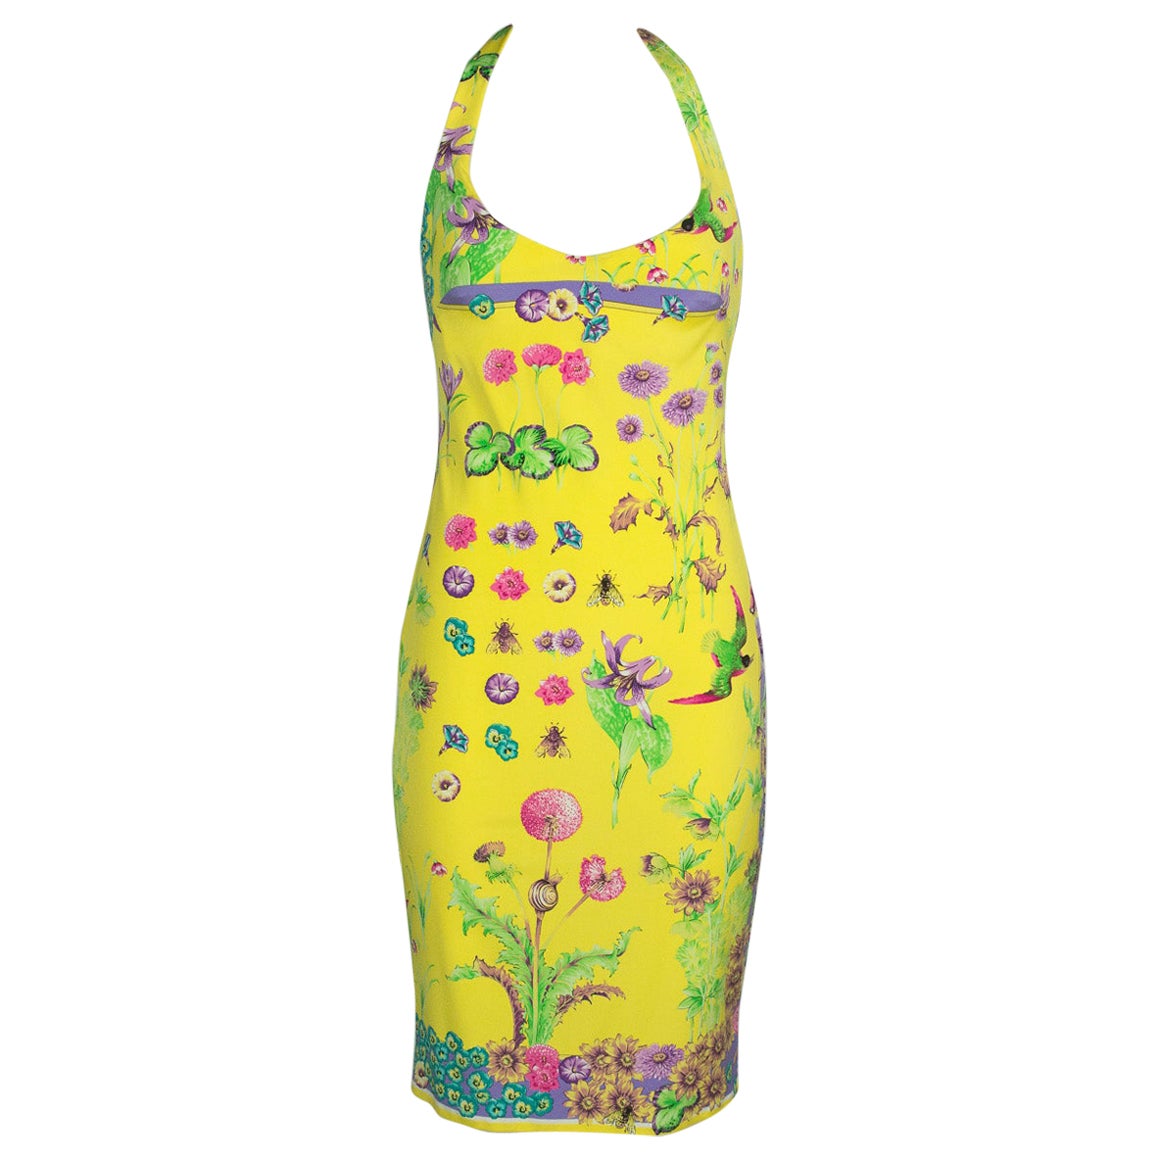 Gianni Versace Couture Printed Halterneck Dress, Circa 1995-1996 For Sale